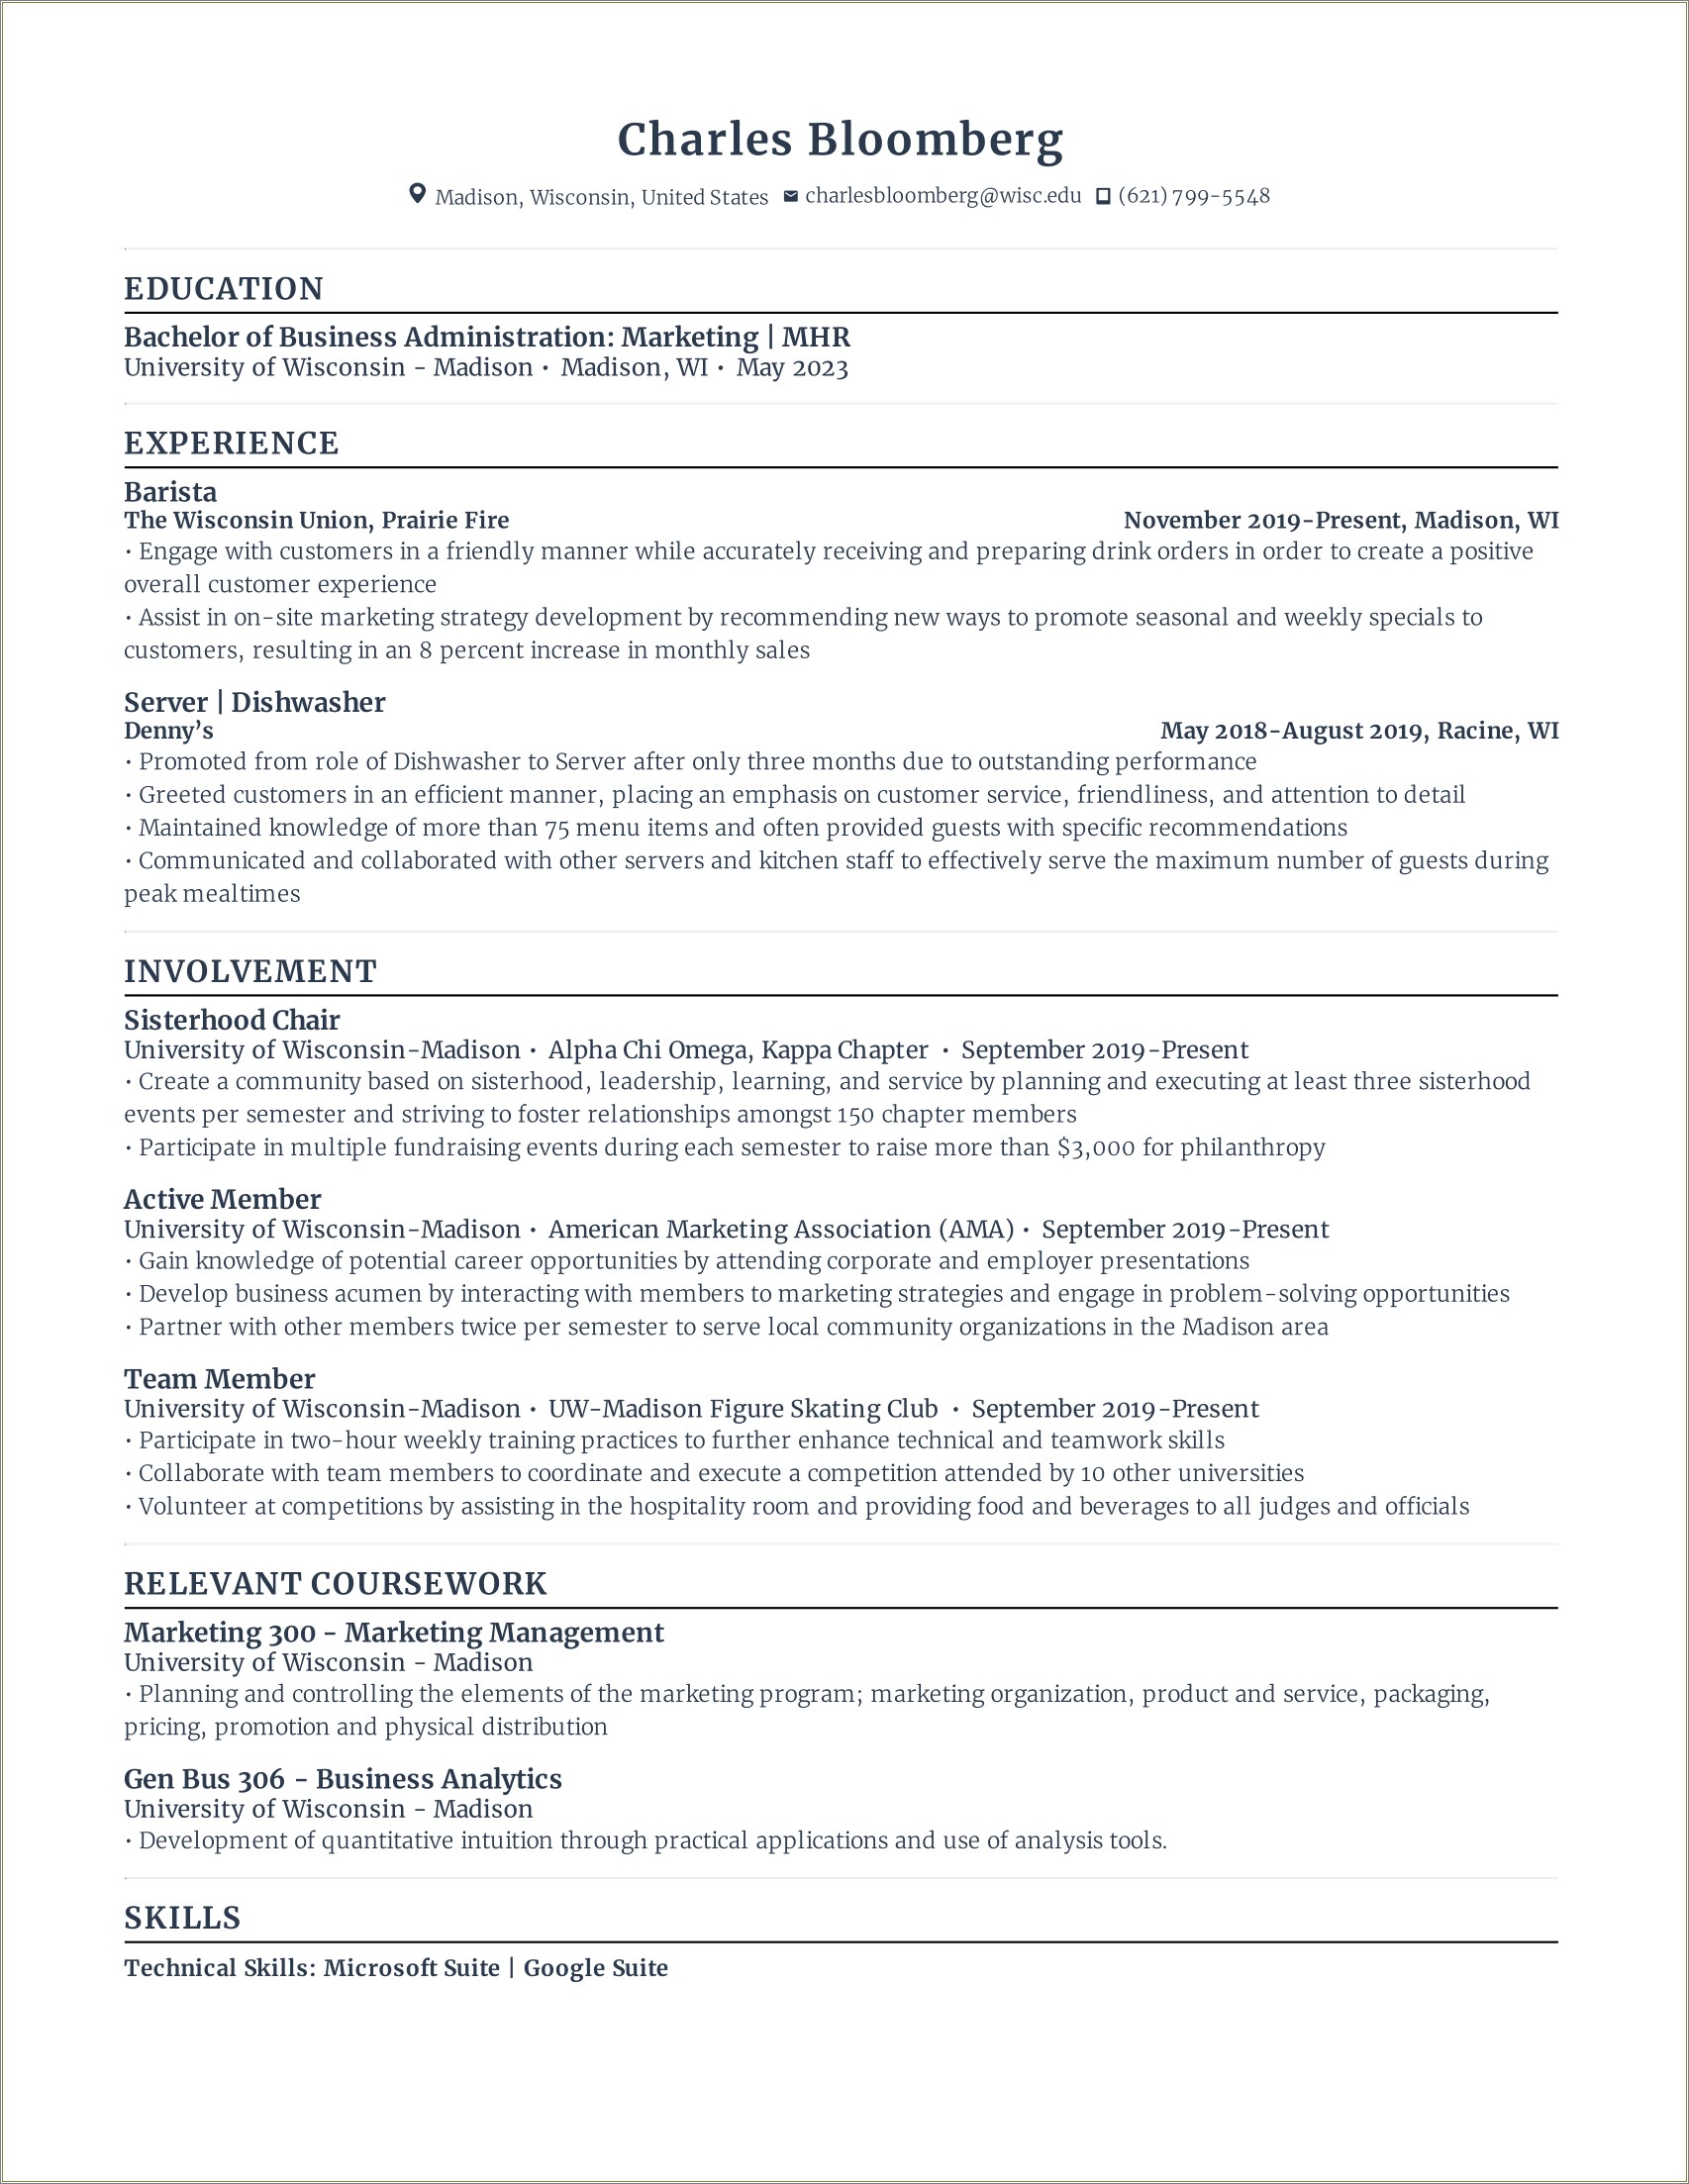 Can I Put Relevant Coursework On Resume